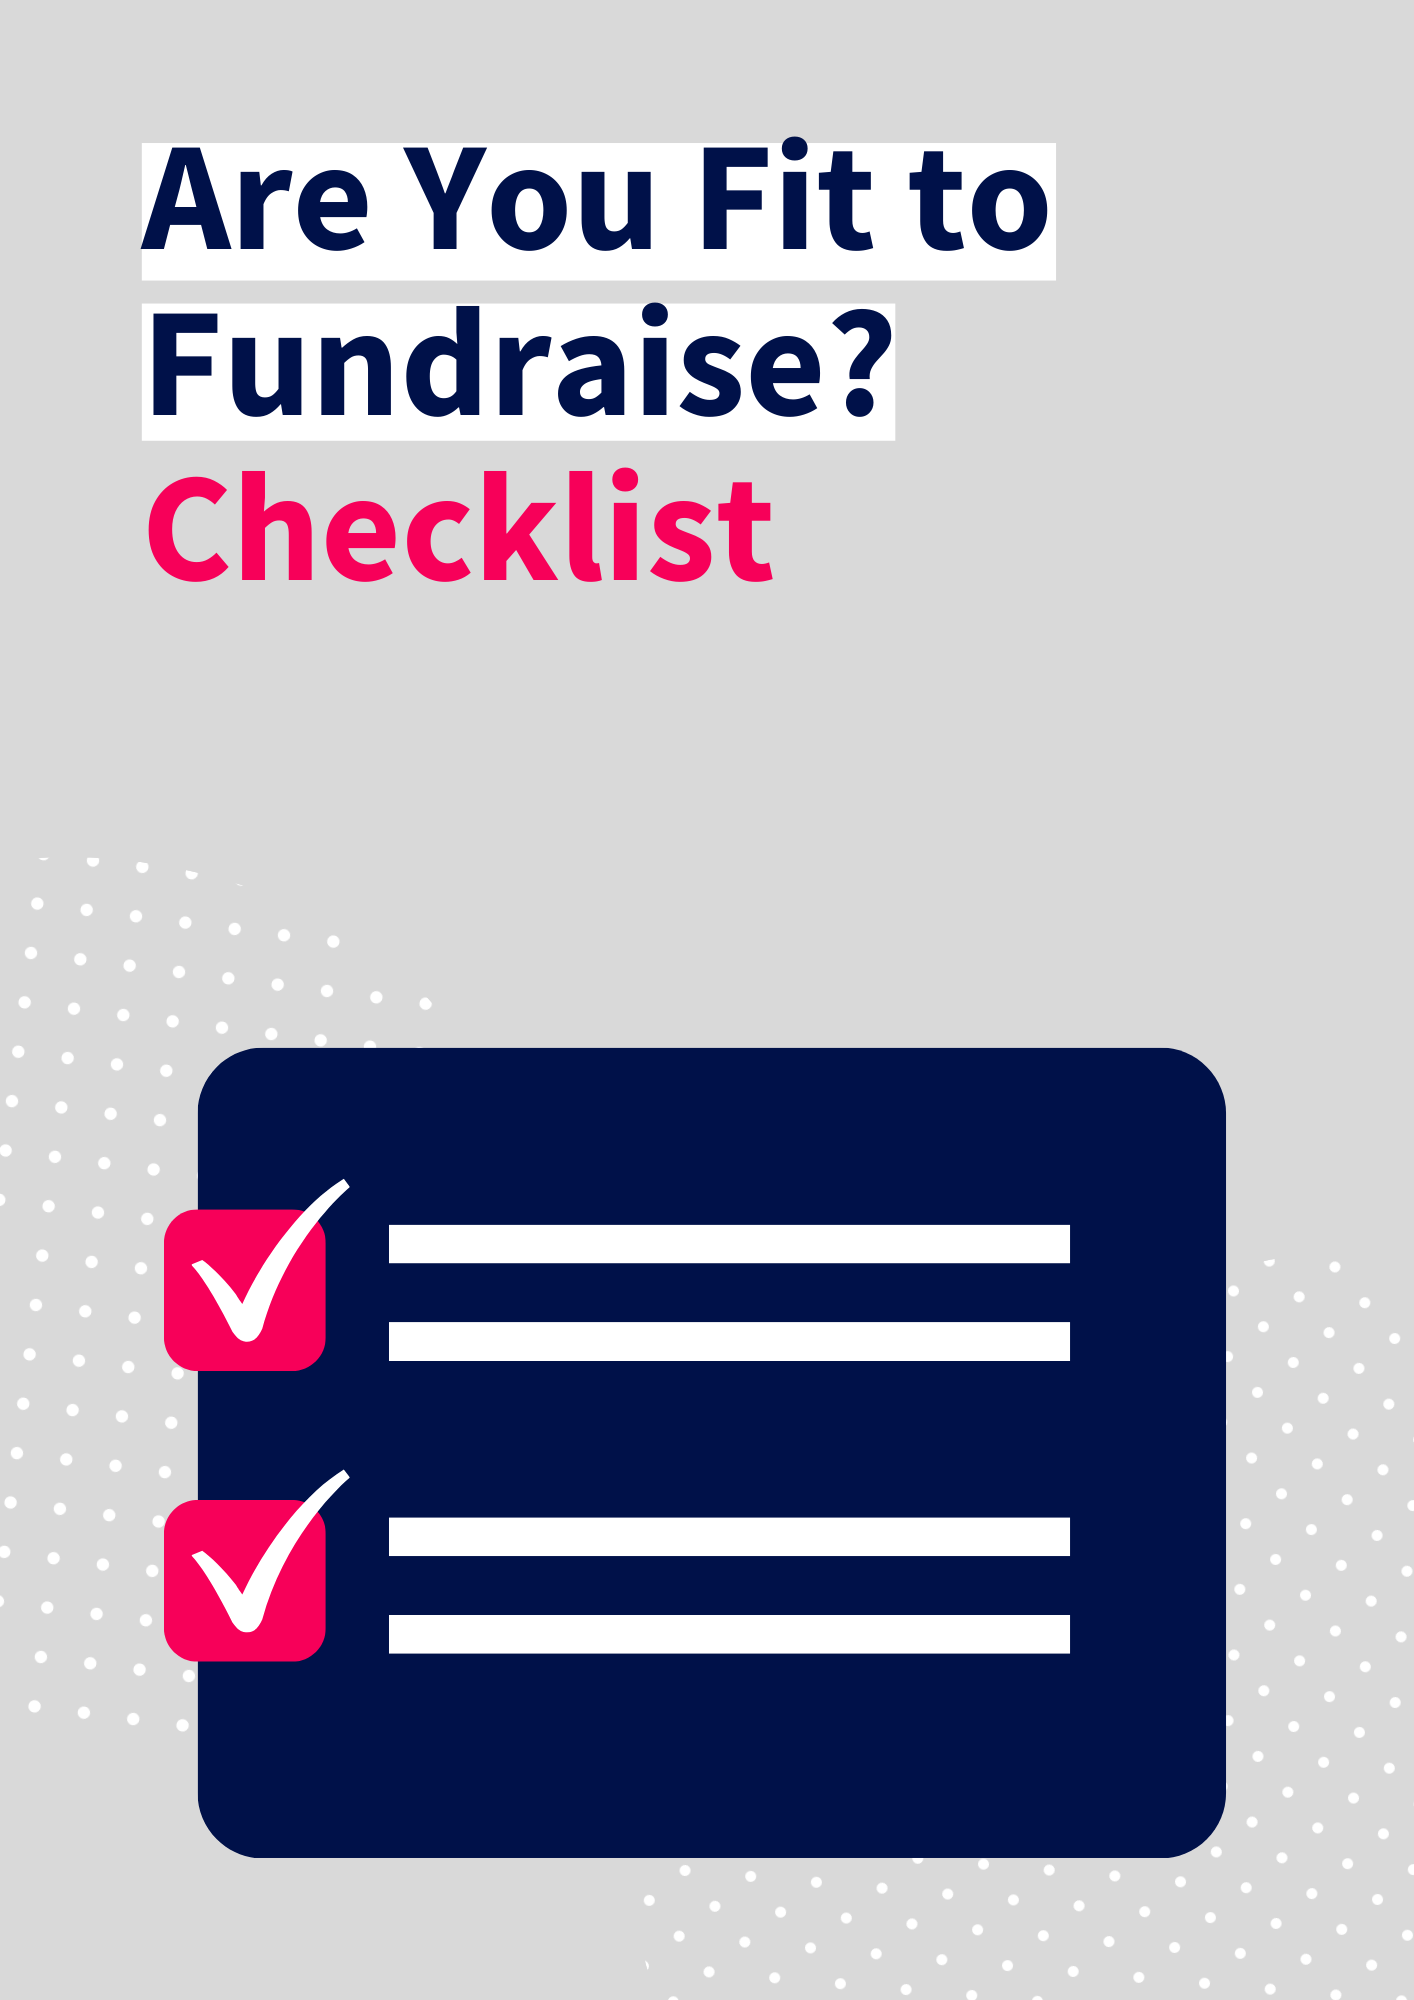 Are You Fit to Fundraise?